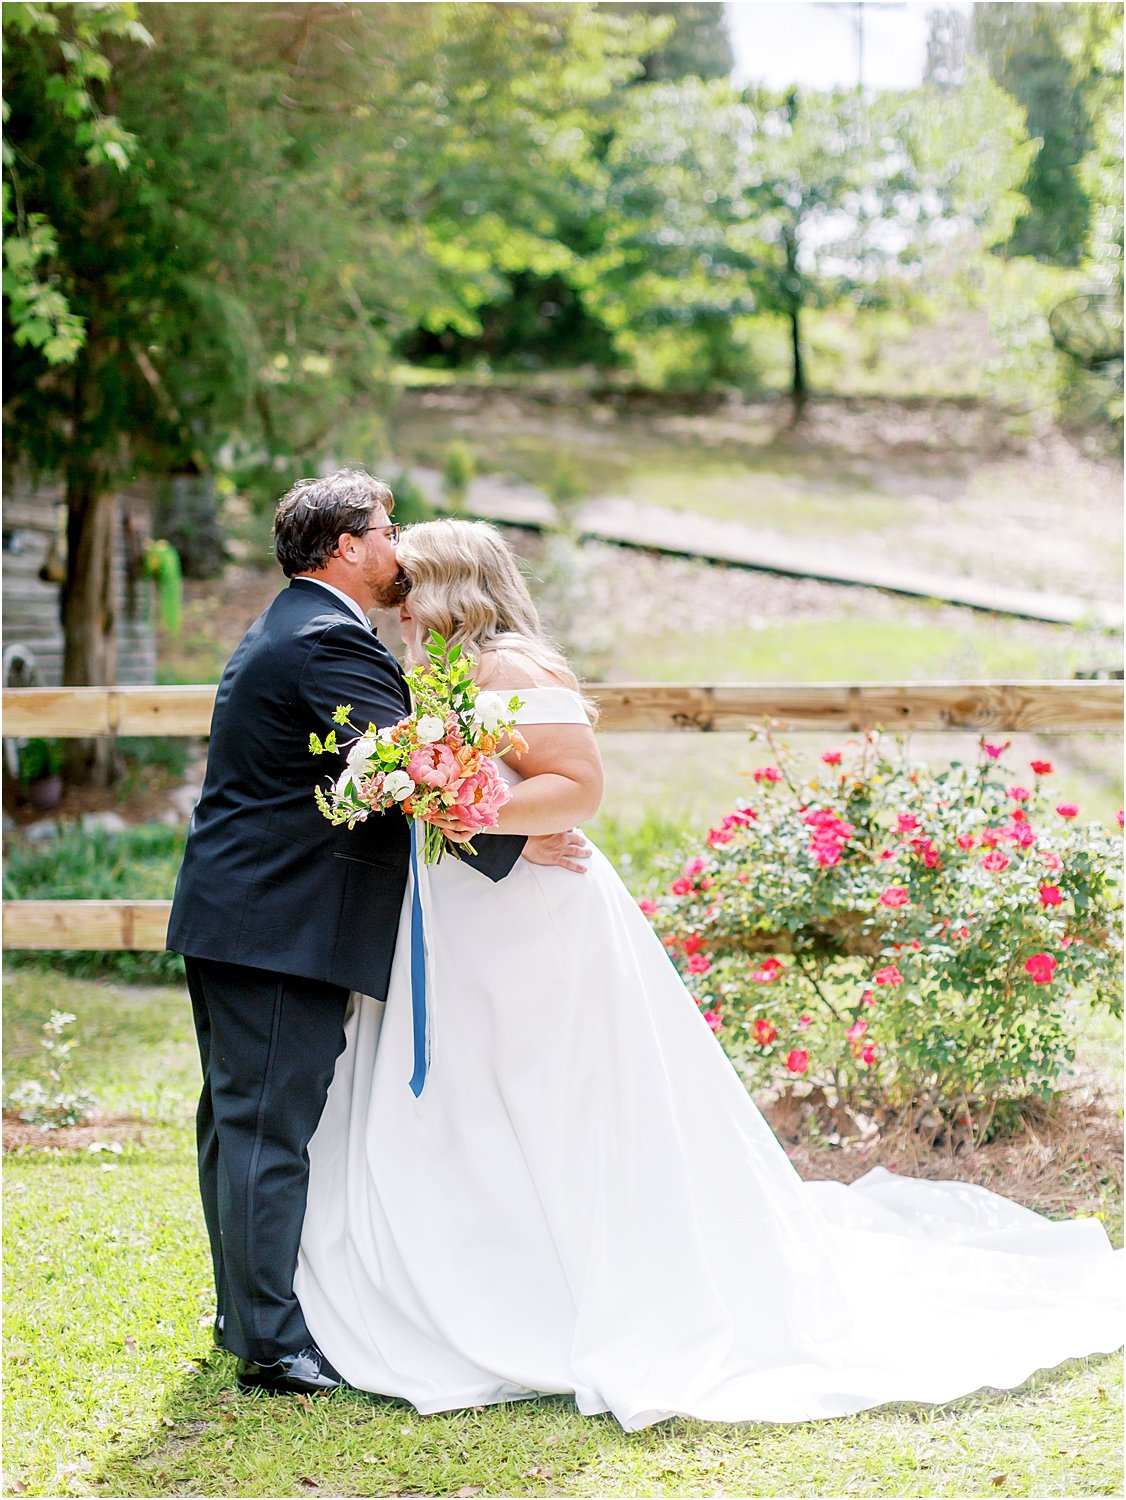 The southern man of your dreams - Bride and Groom summer wedding